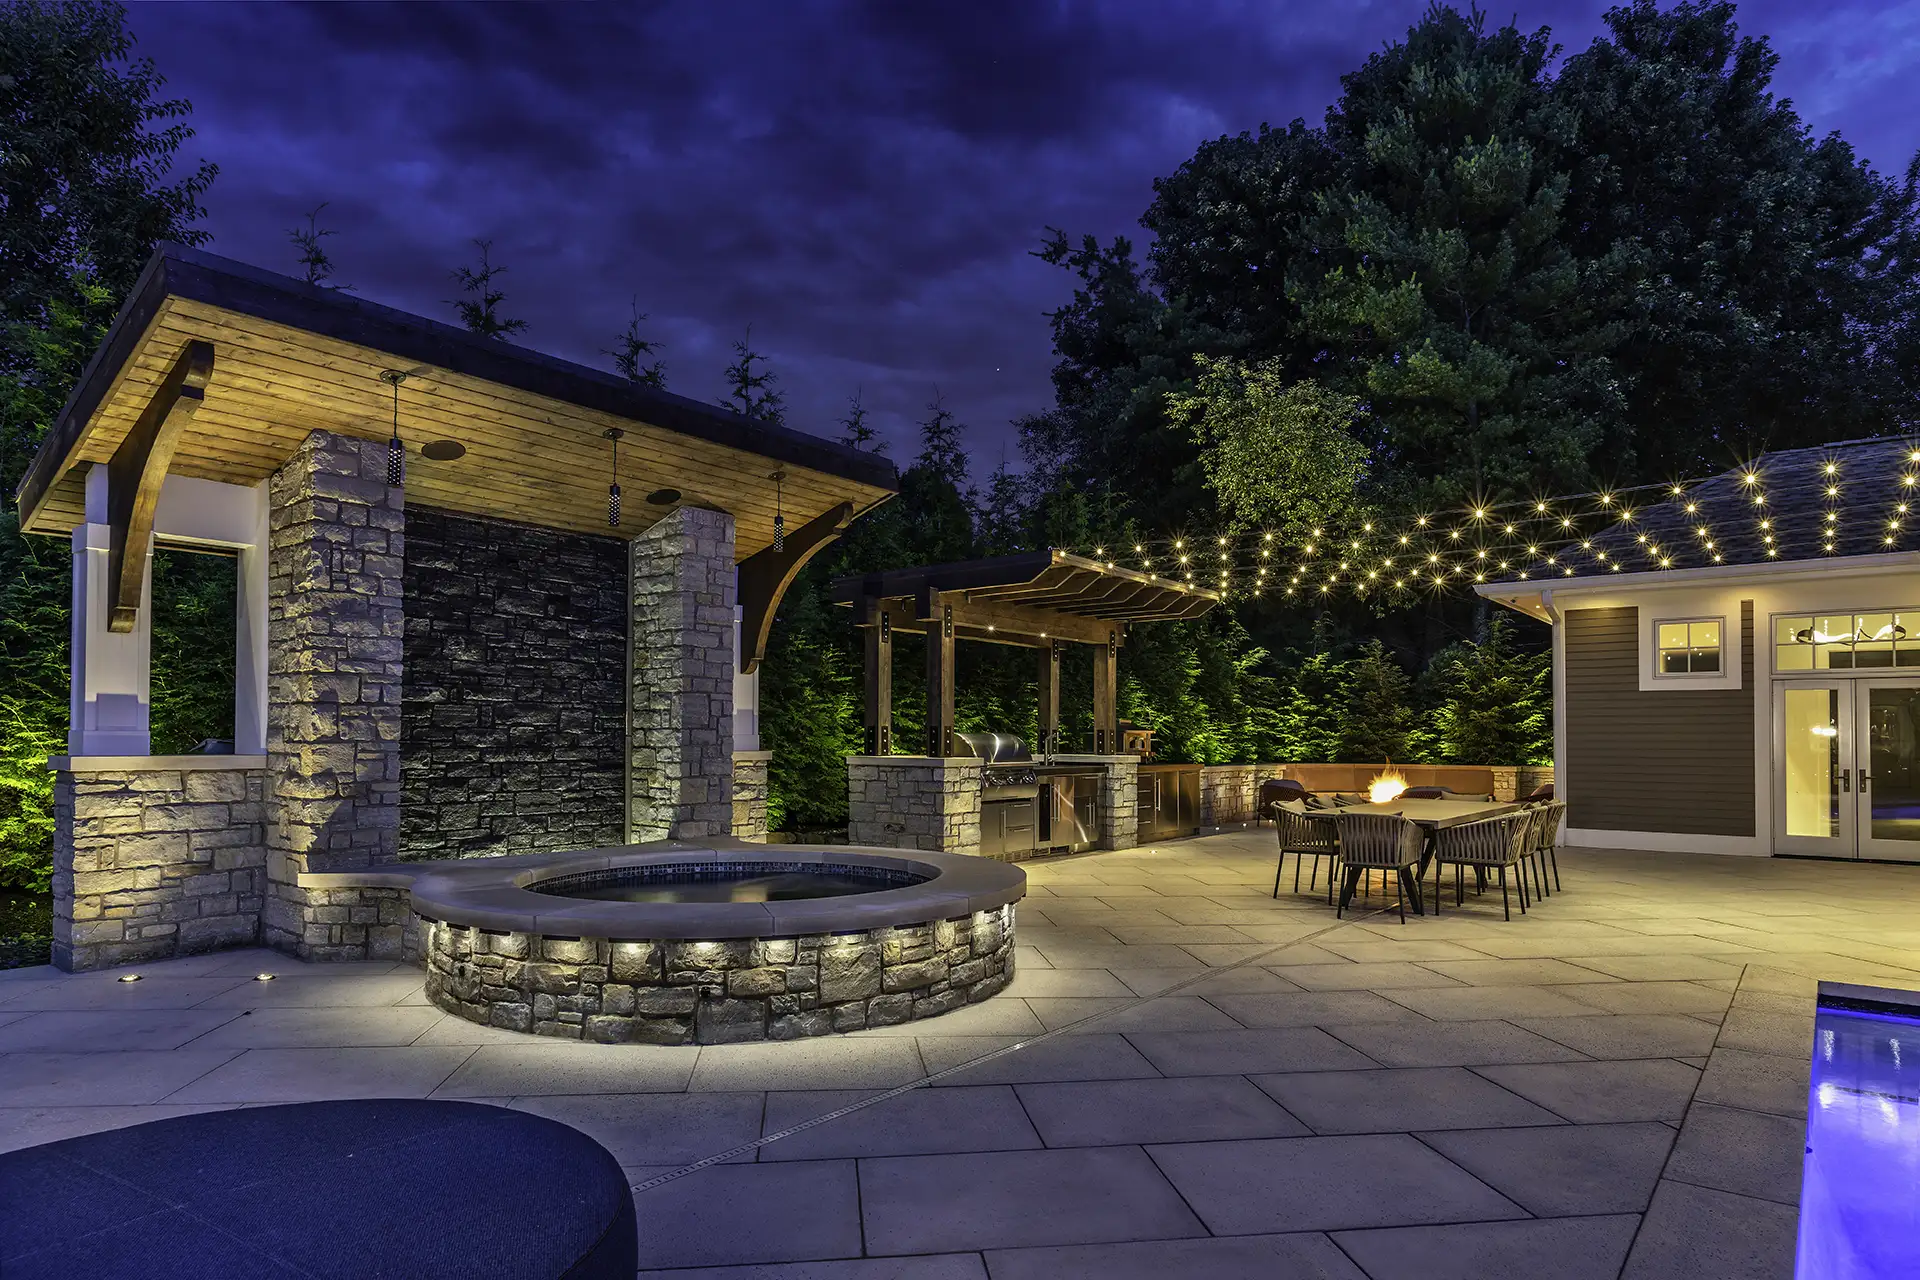 Victory Lane image 8 pool spa outdoor kitchen porch dining area Lighthouse Outdoor Lighting and Audio OH Columbus Cincinnati Dayton